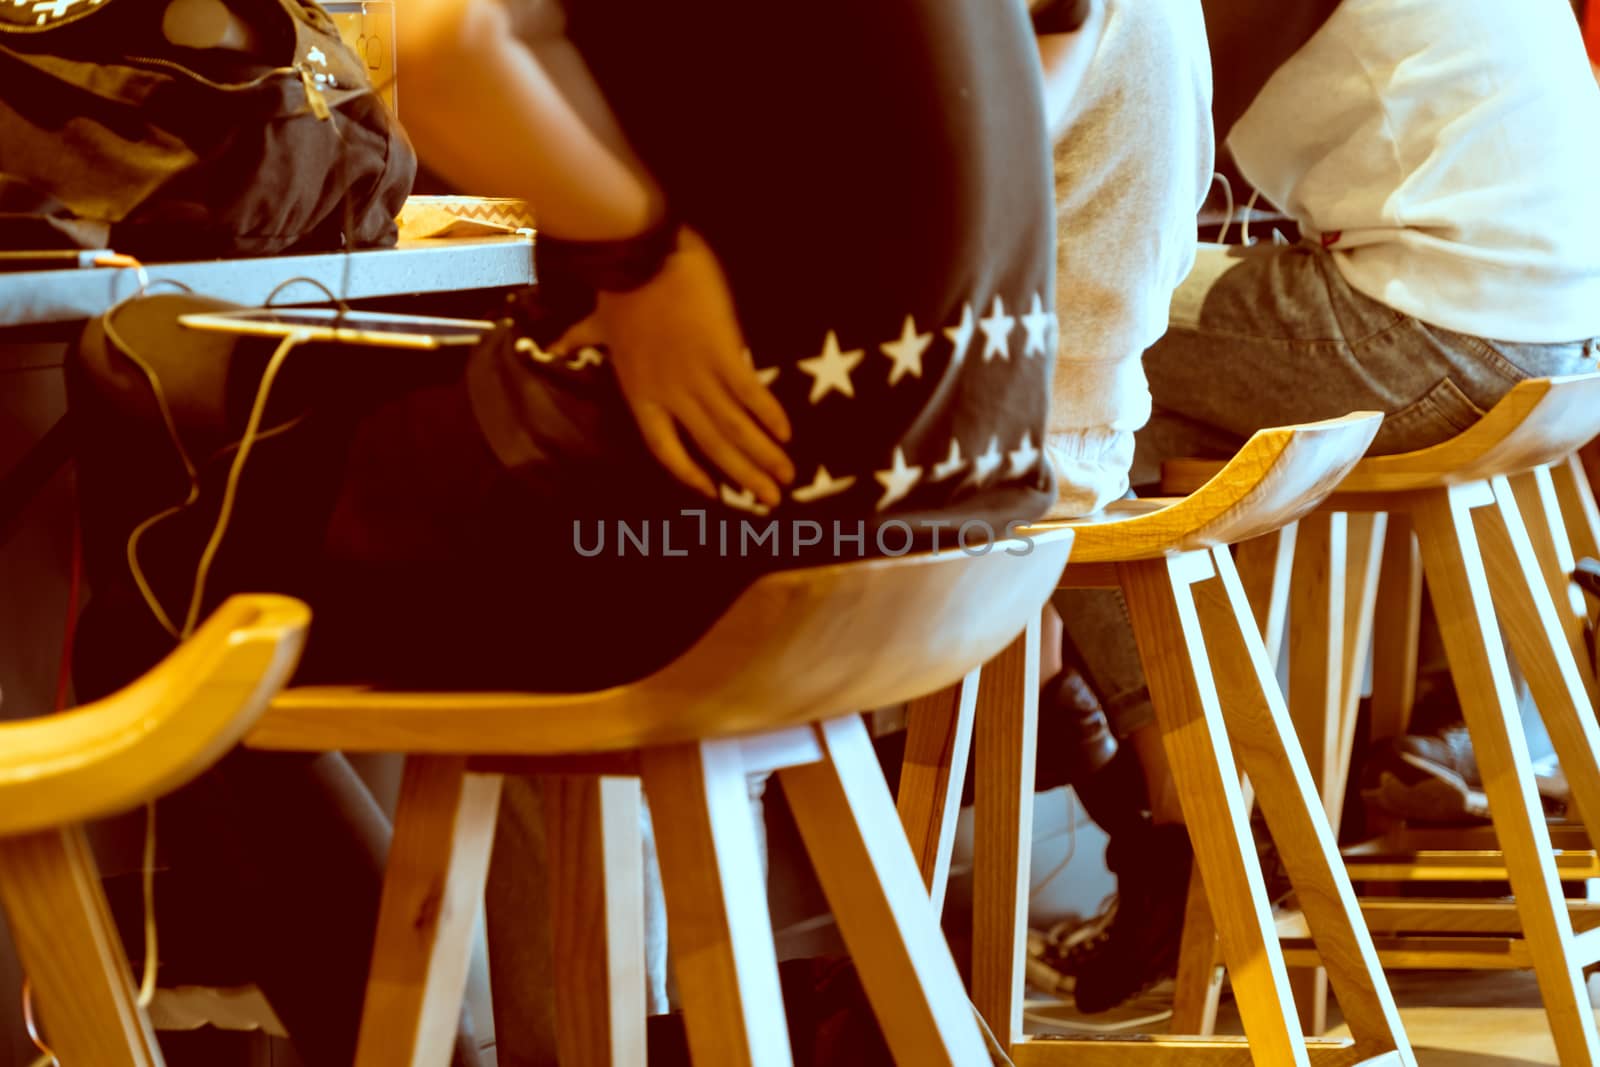 Boy group sitting on the wooden chair in coffee shop